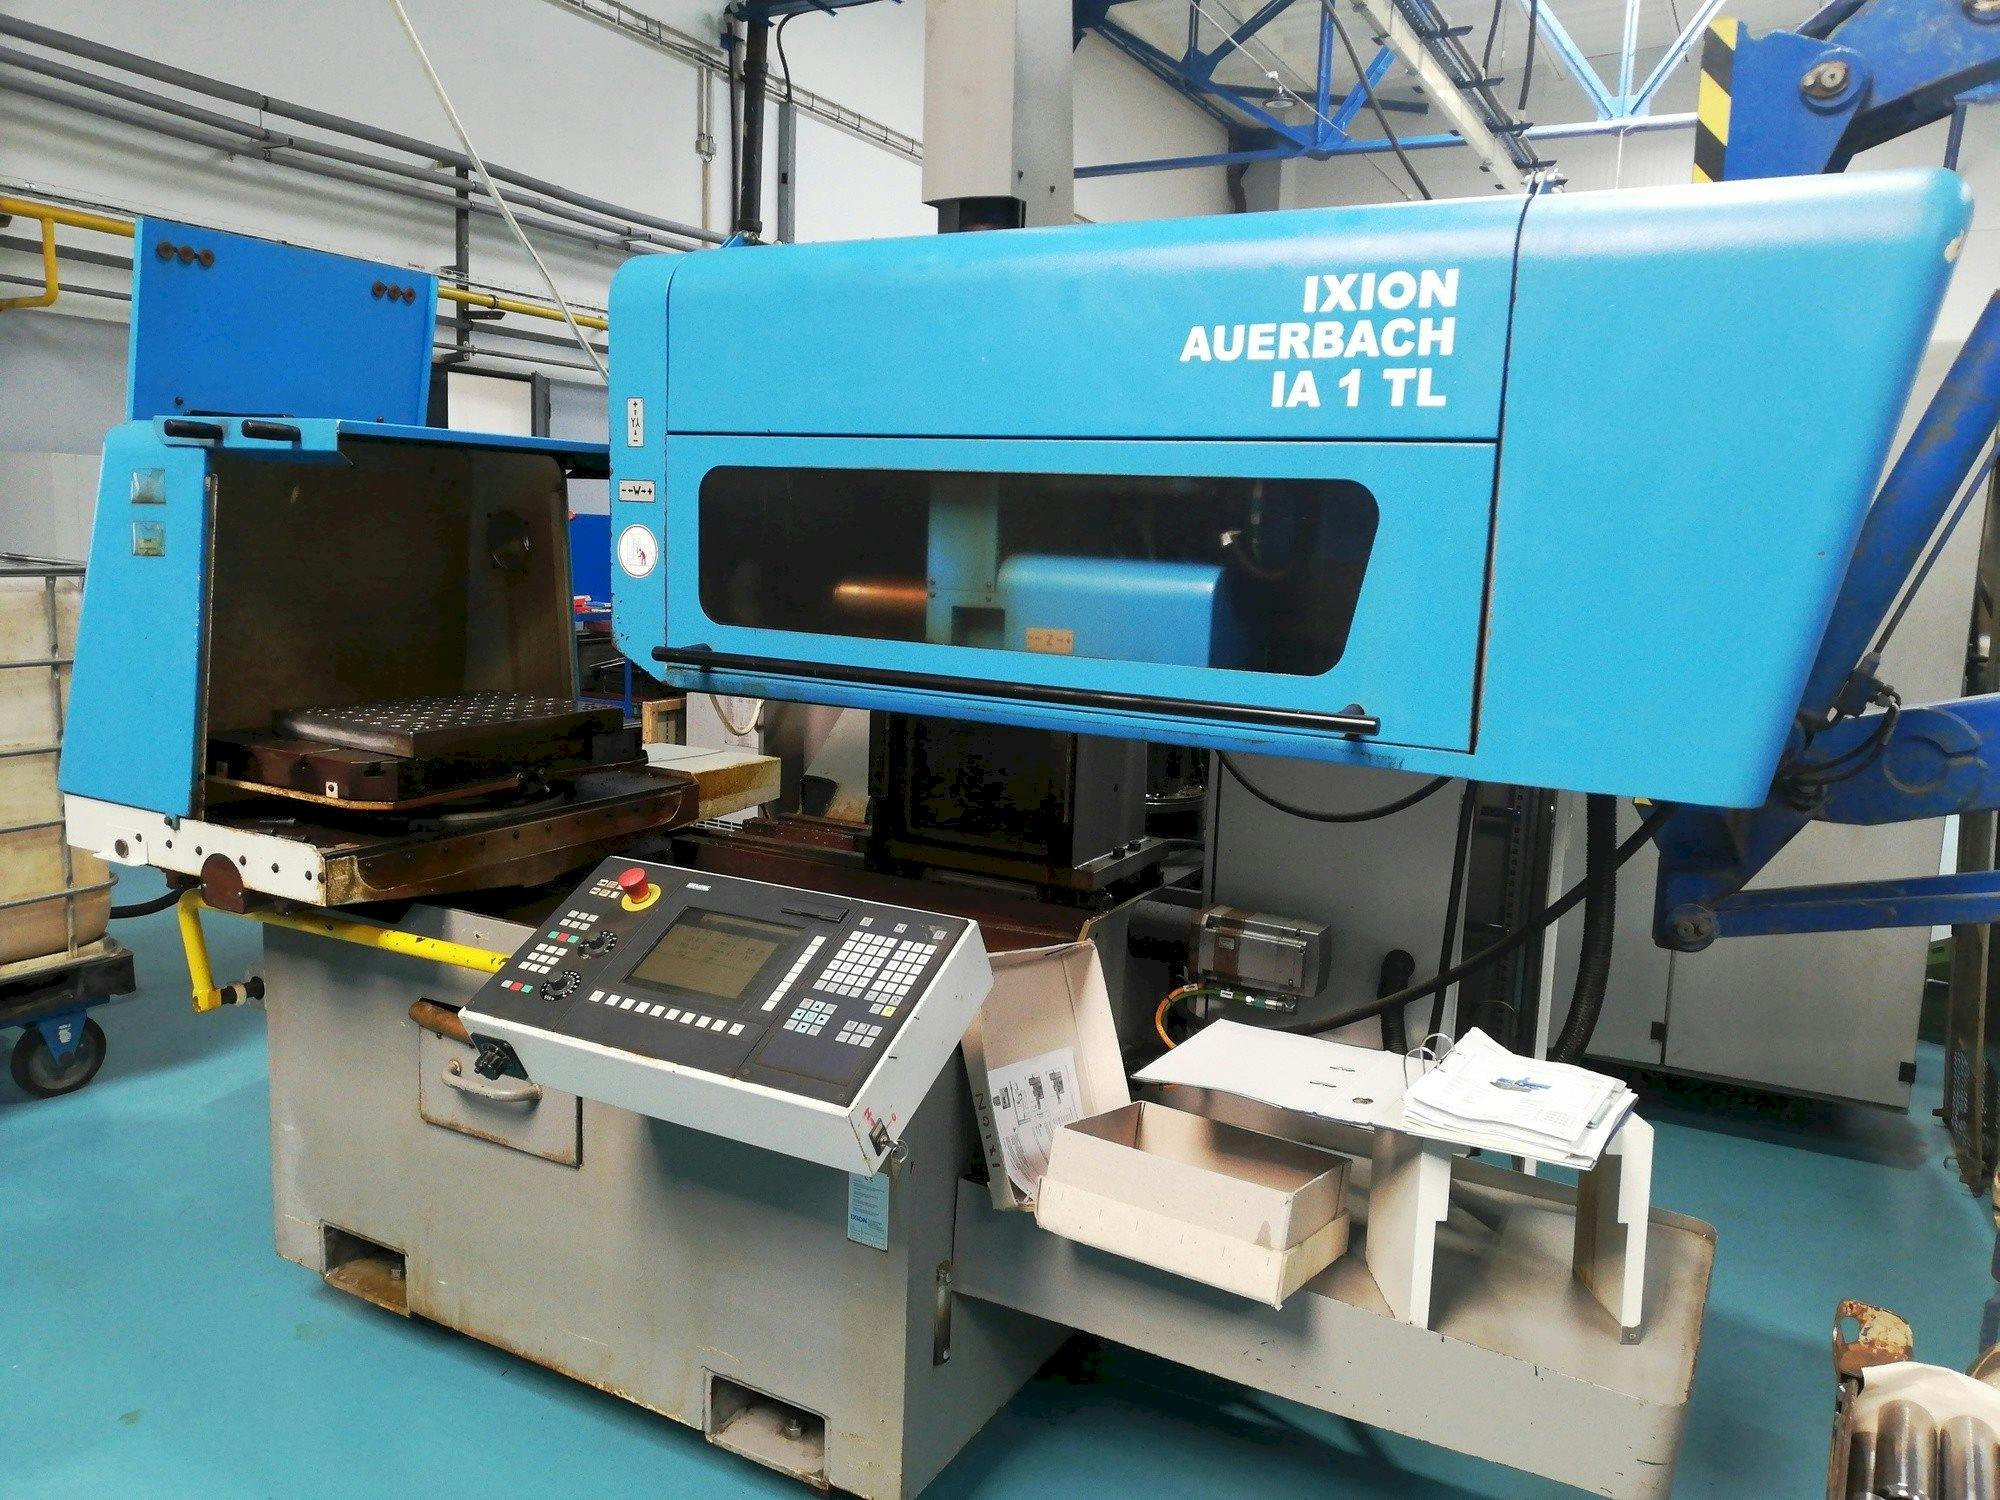 Front view of IXION Auerbach IA 1 TL  machine